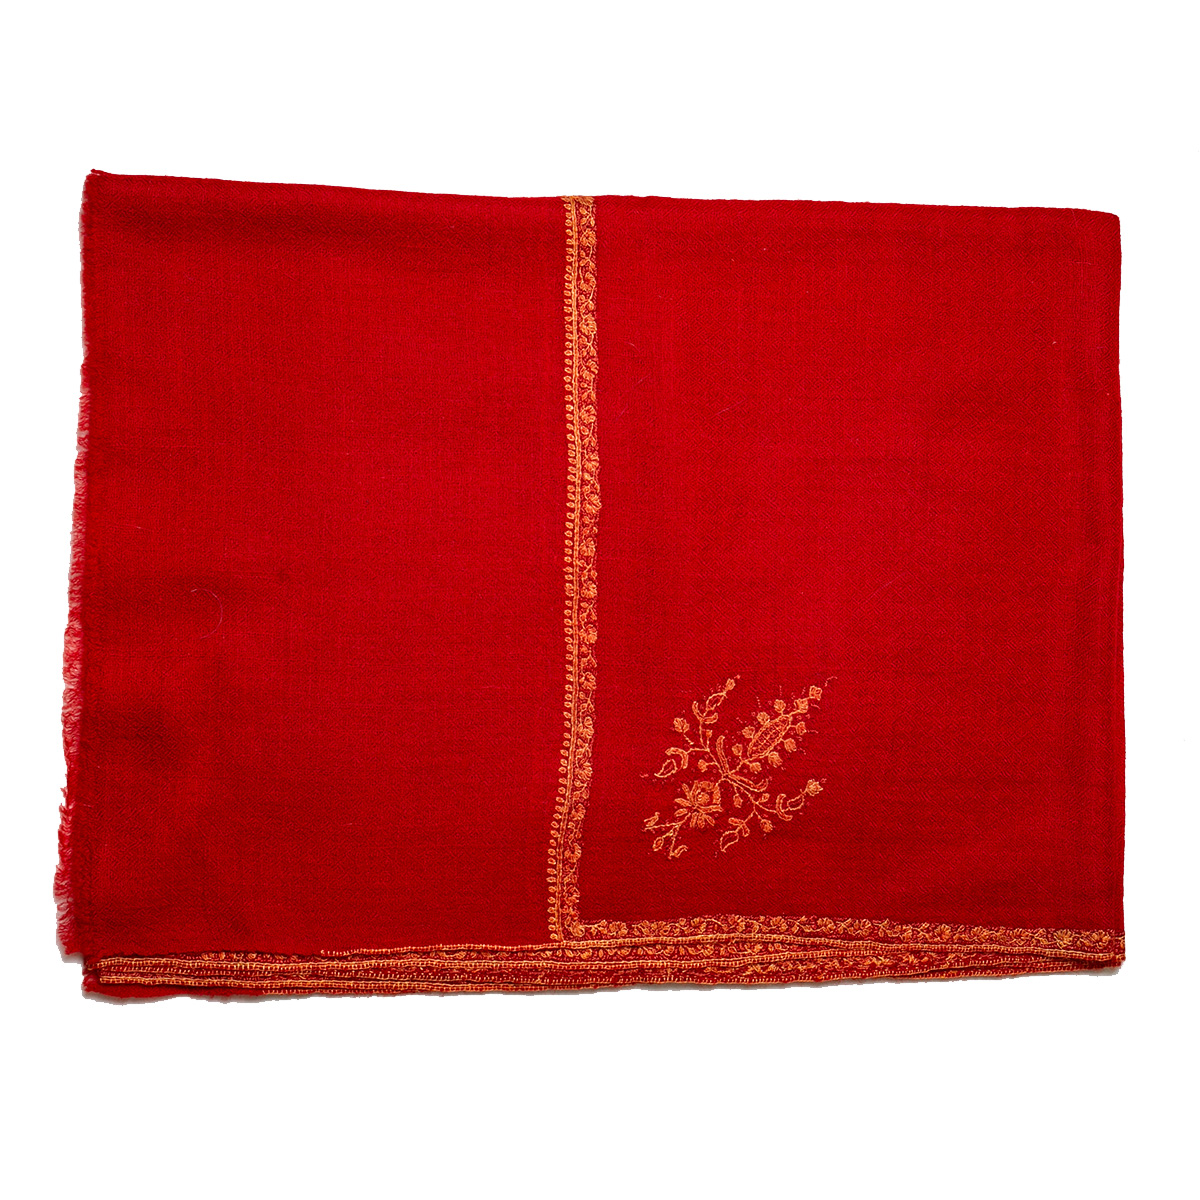 Hand Embroidered Cashmere Pashmina Stole - Red & Orange